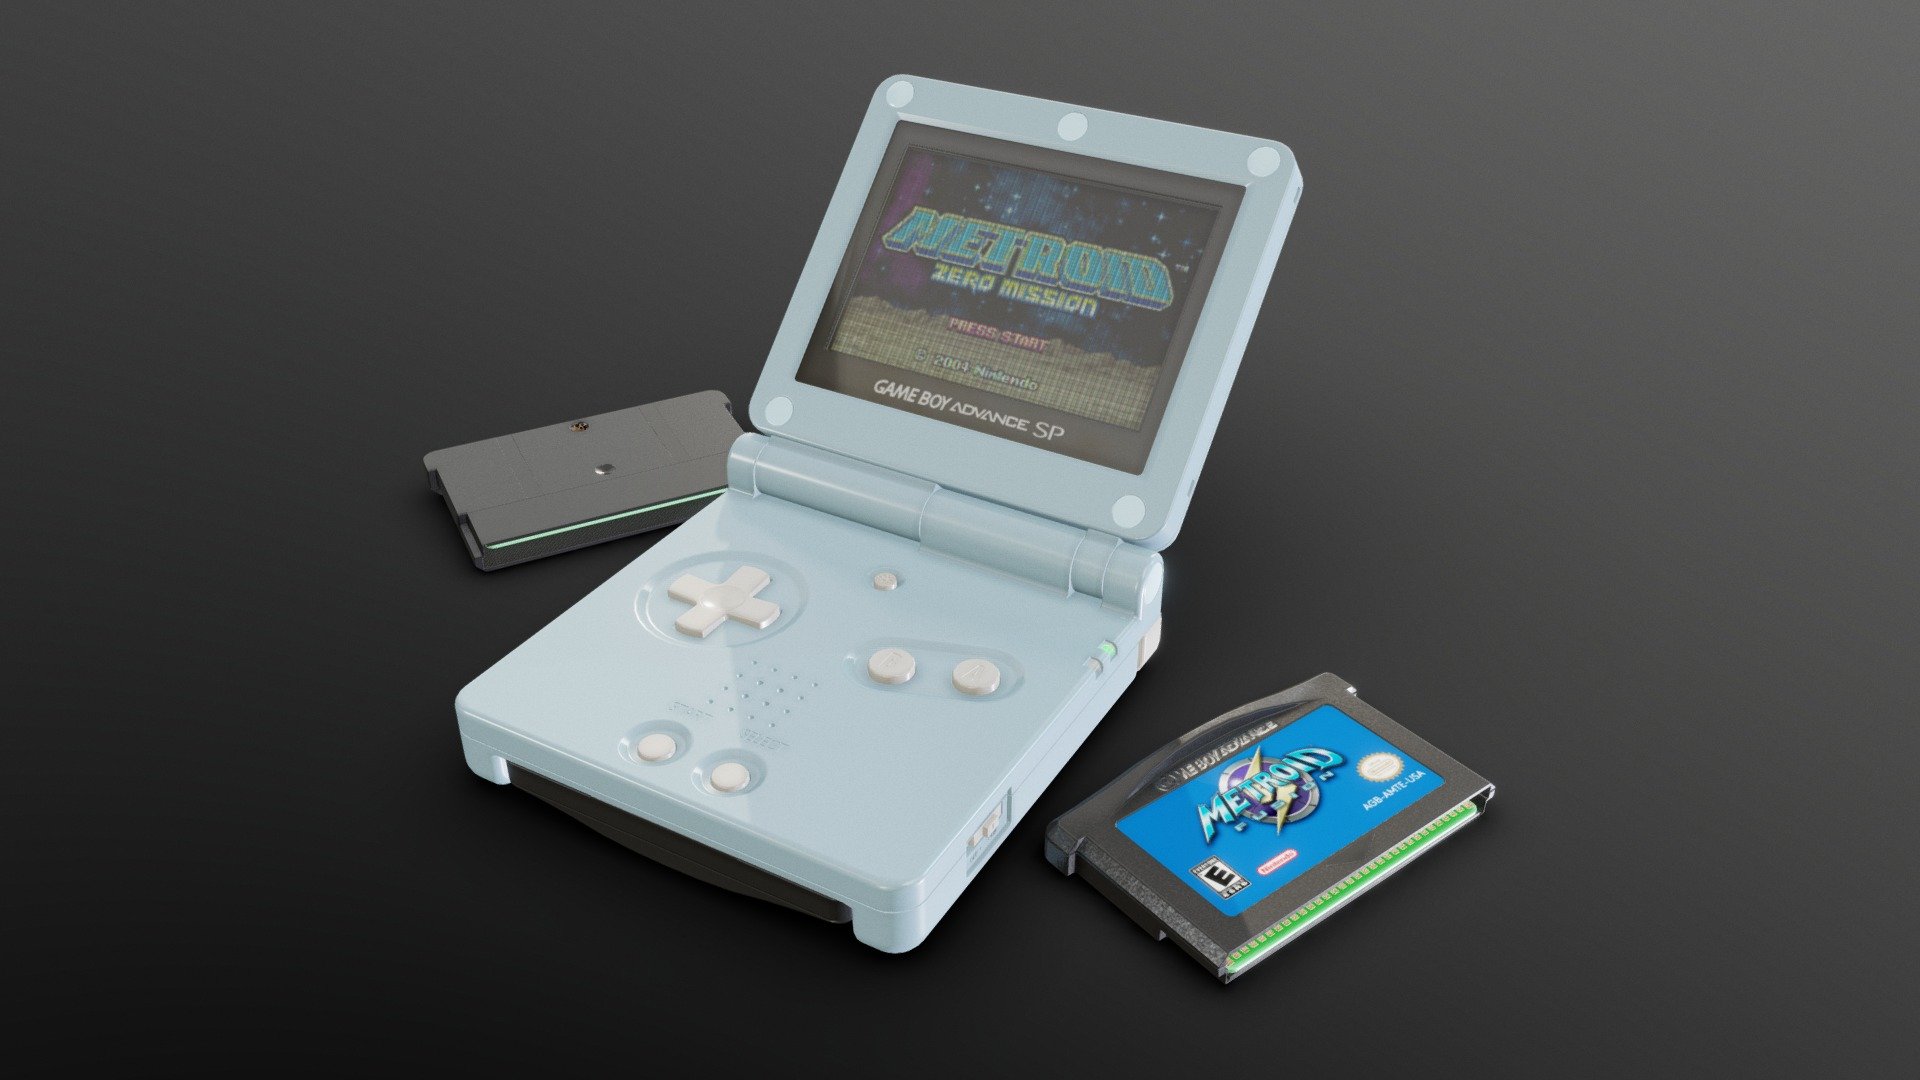 It's been a while since my last upload! This is my stab at a Gameboy Advance SP.

This is my first released model made using a weighted normal workflow. Typically I would make the geometry and bake in any necessary bevels using the bevel node in Blender but this time it's all actual geometry!

This model is game ready, though be warned it is fairly high poly for what it is.

34,500k Tris for the main system and about 2500k tris for each cartridge.

The extra attached file contains the blend file I made this in as well as all the necessary textures.
The blend file also includes the LCD material I used to bake the screen. It should be the first thing Blender opens to, if not check the Outliner for the &ldquo;LCD Blender